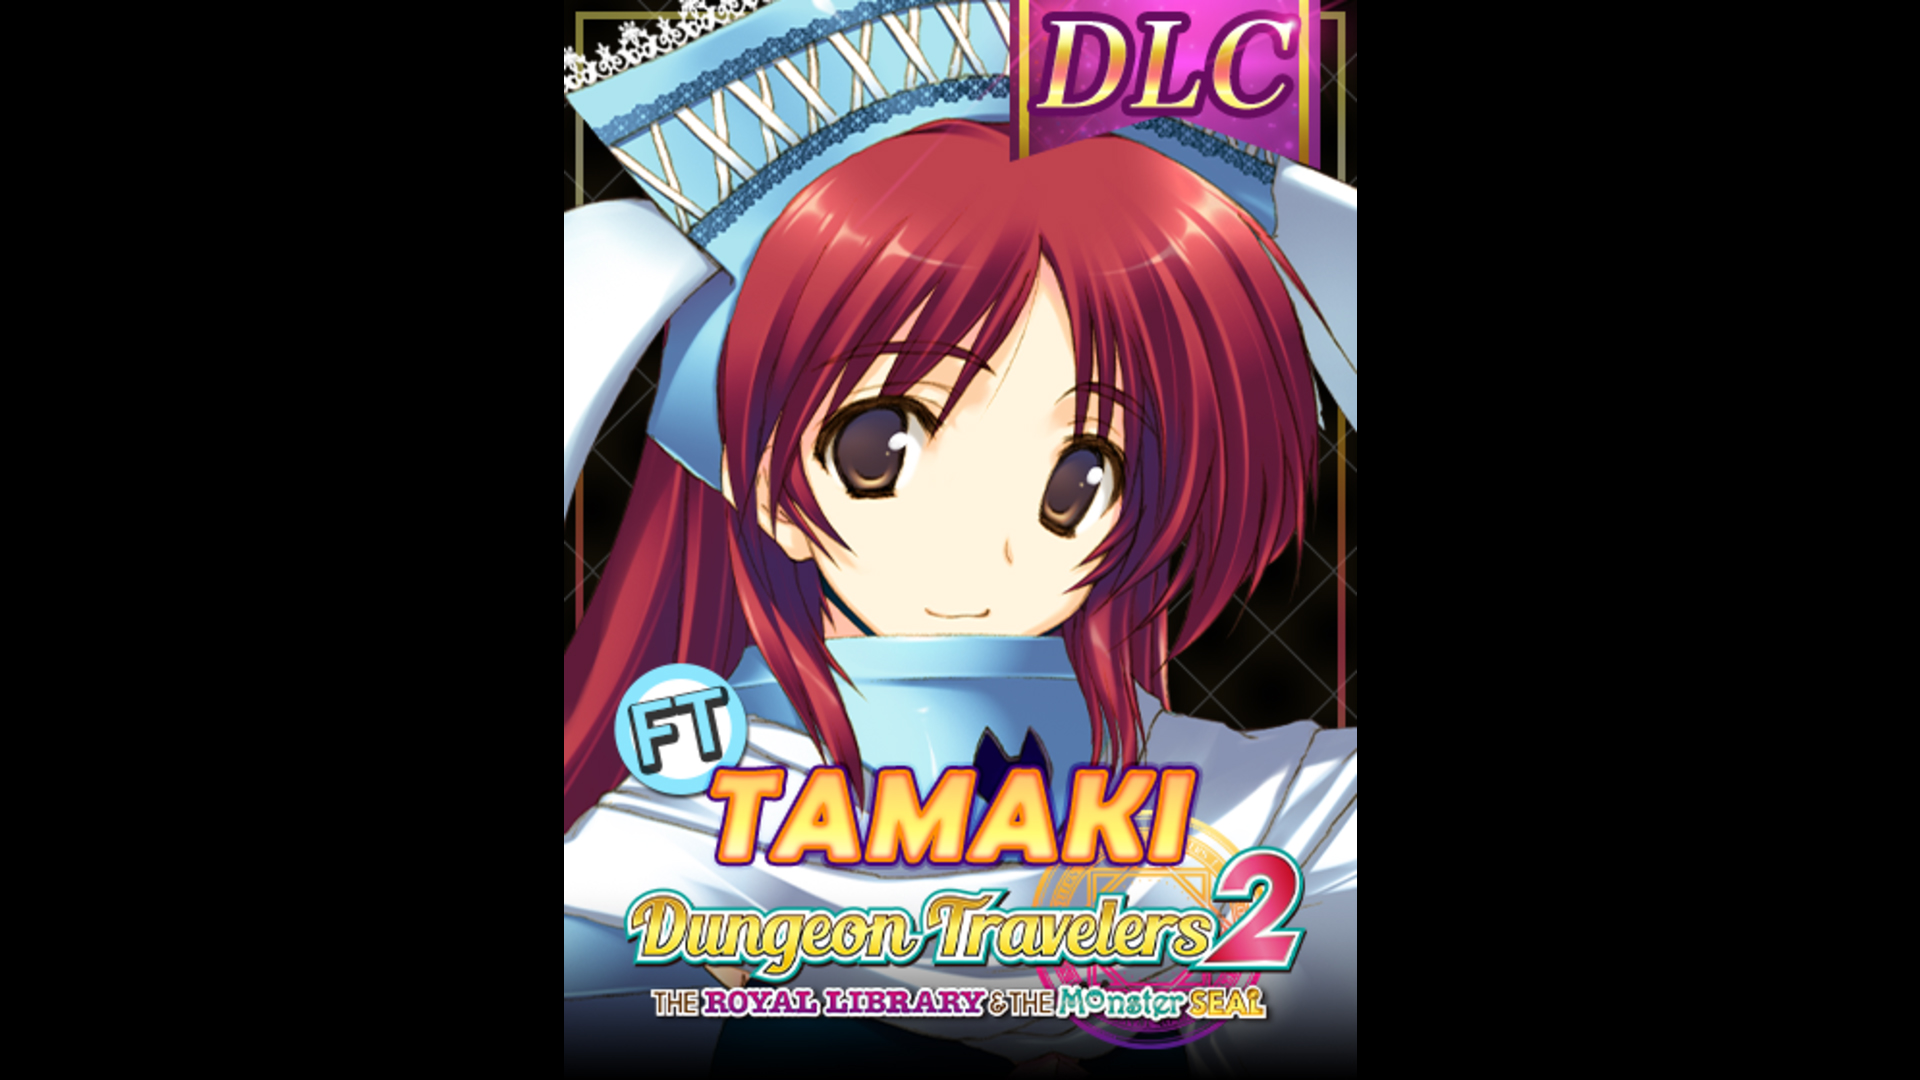 DLC - To Heart 2 Character: Fighter Tamaki (Dungeon Travelers 2) - RPG - 1